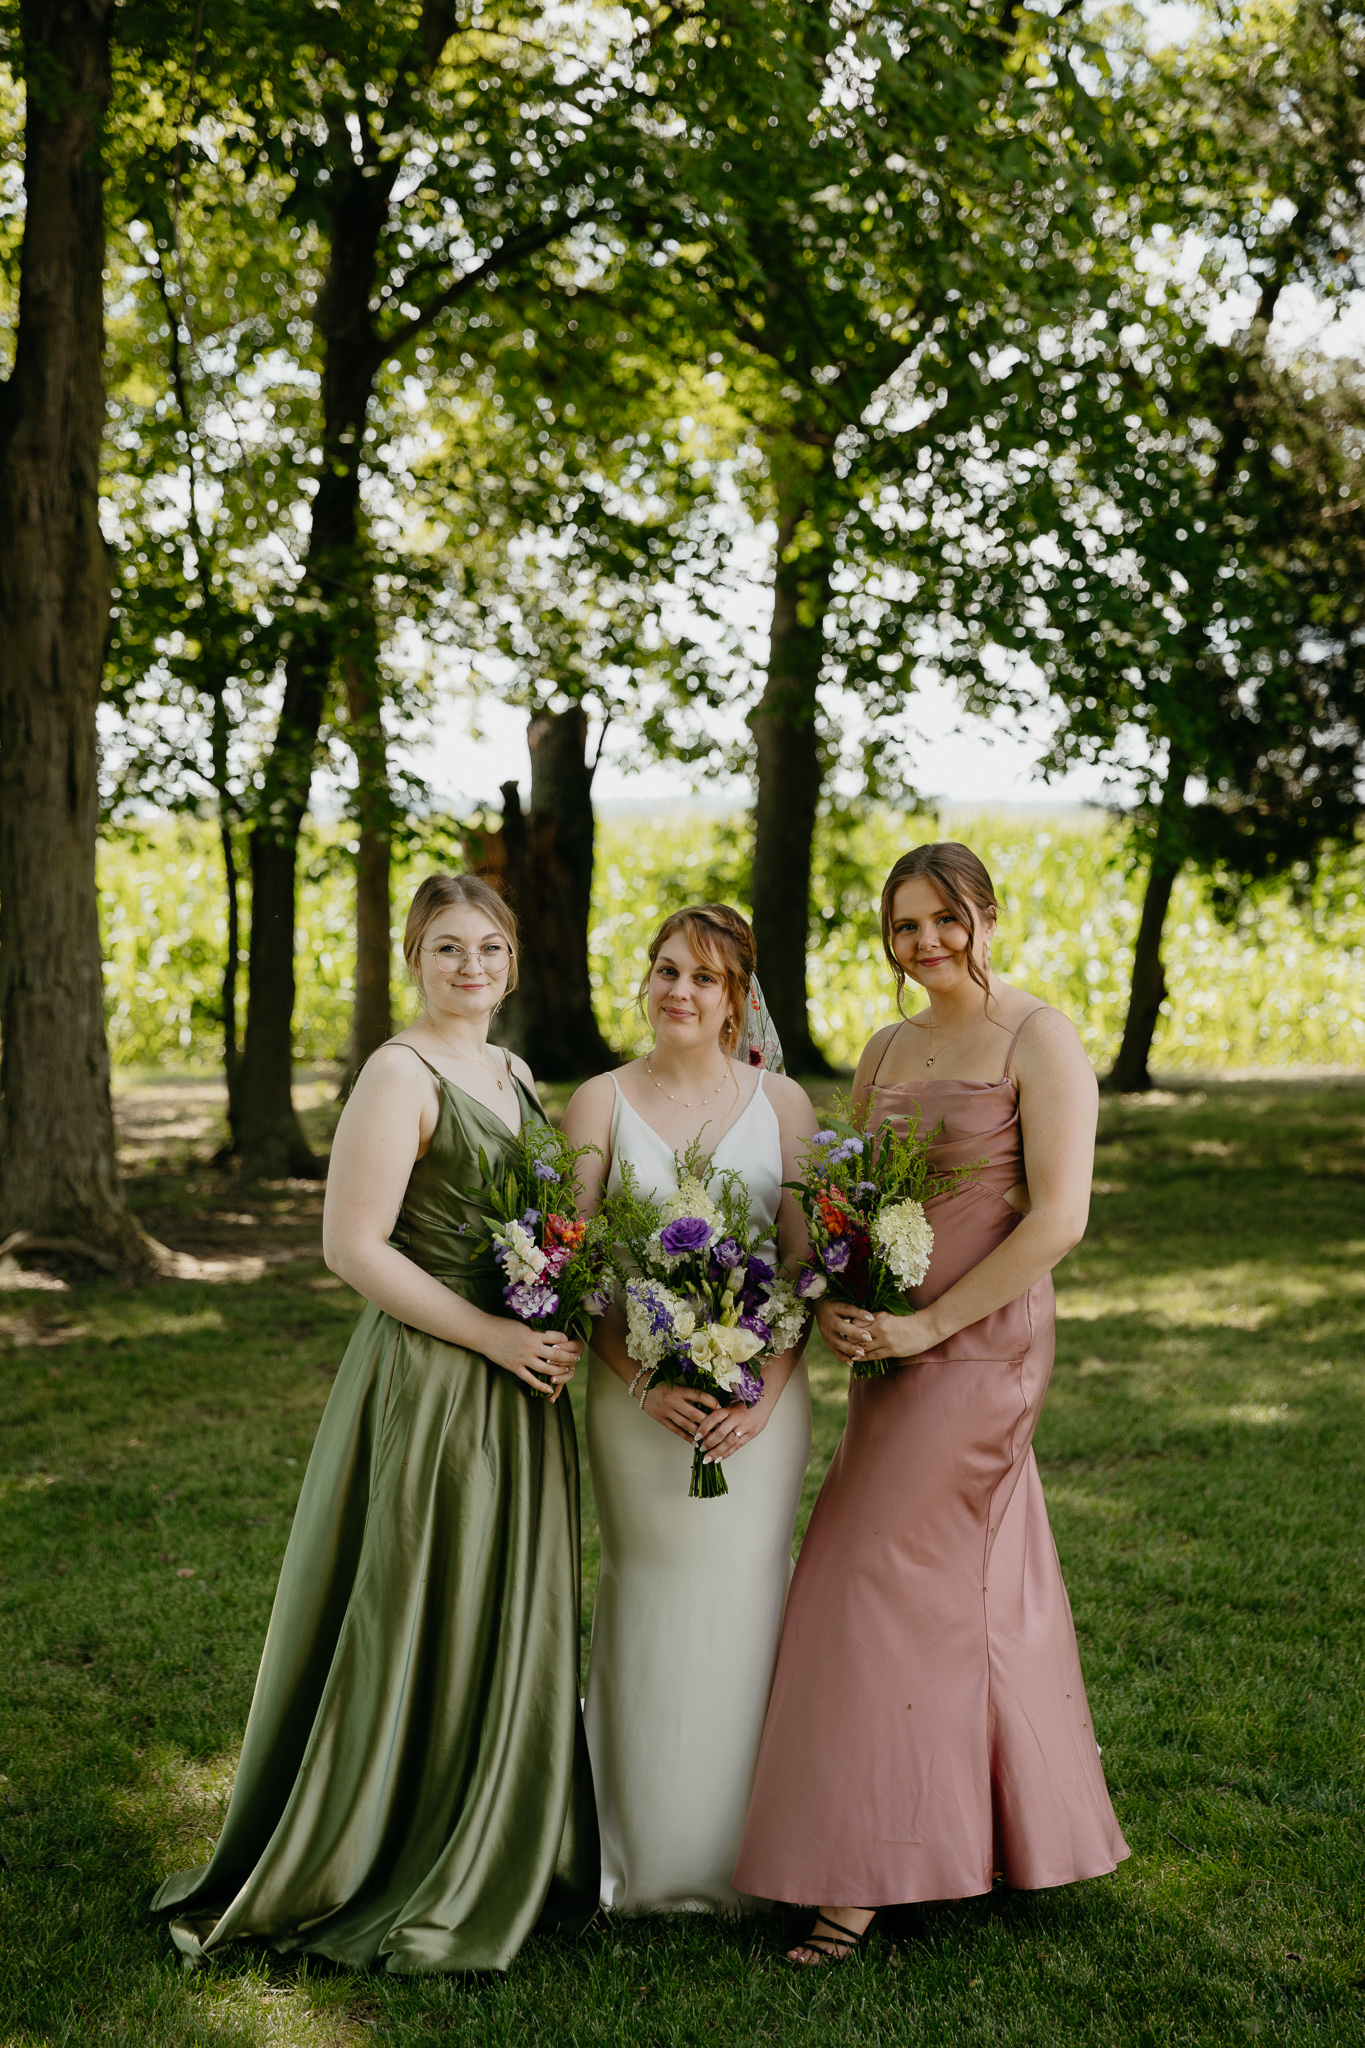 Outdoor Indiana Wedding in Summer // Bridal Party